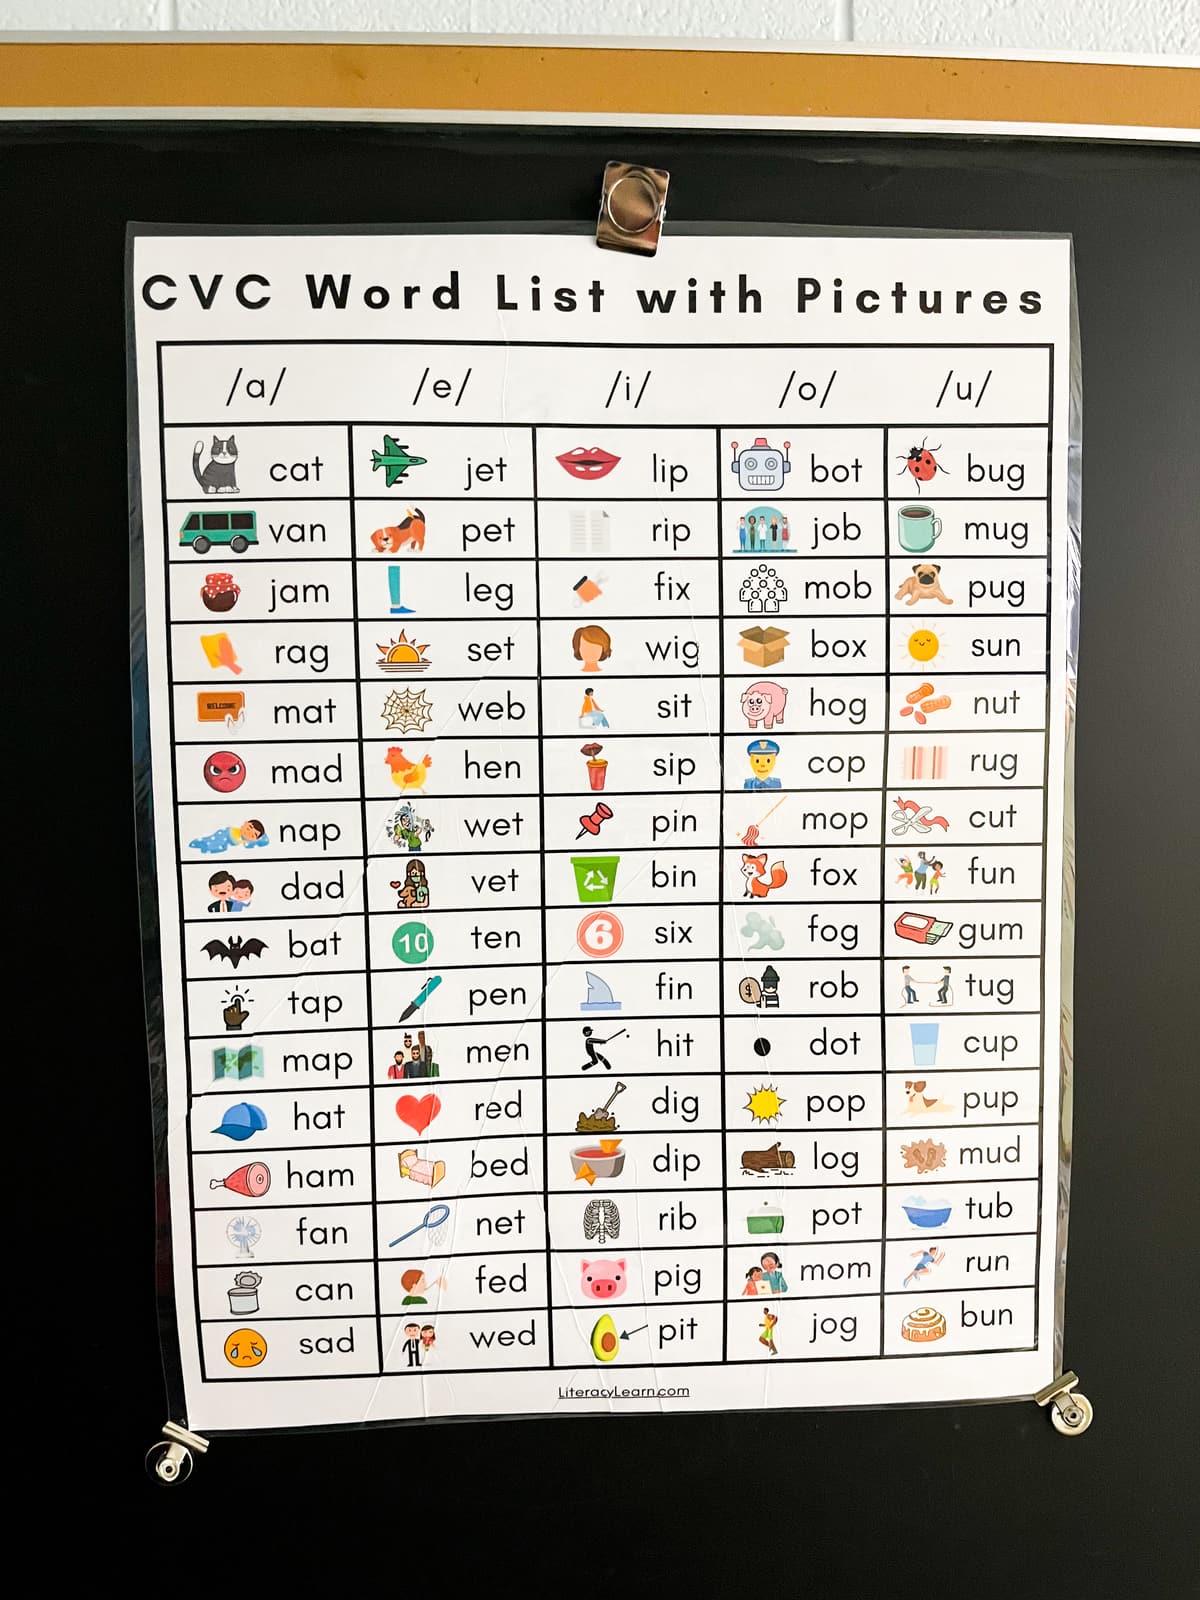 The printable list of CVC words and pictures printed large as a poster. 